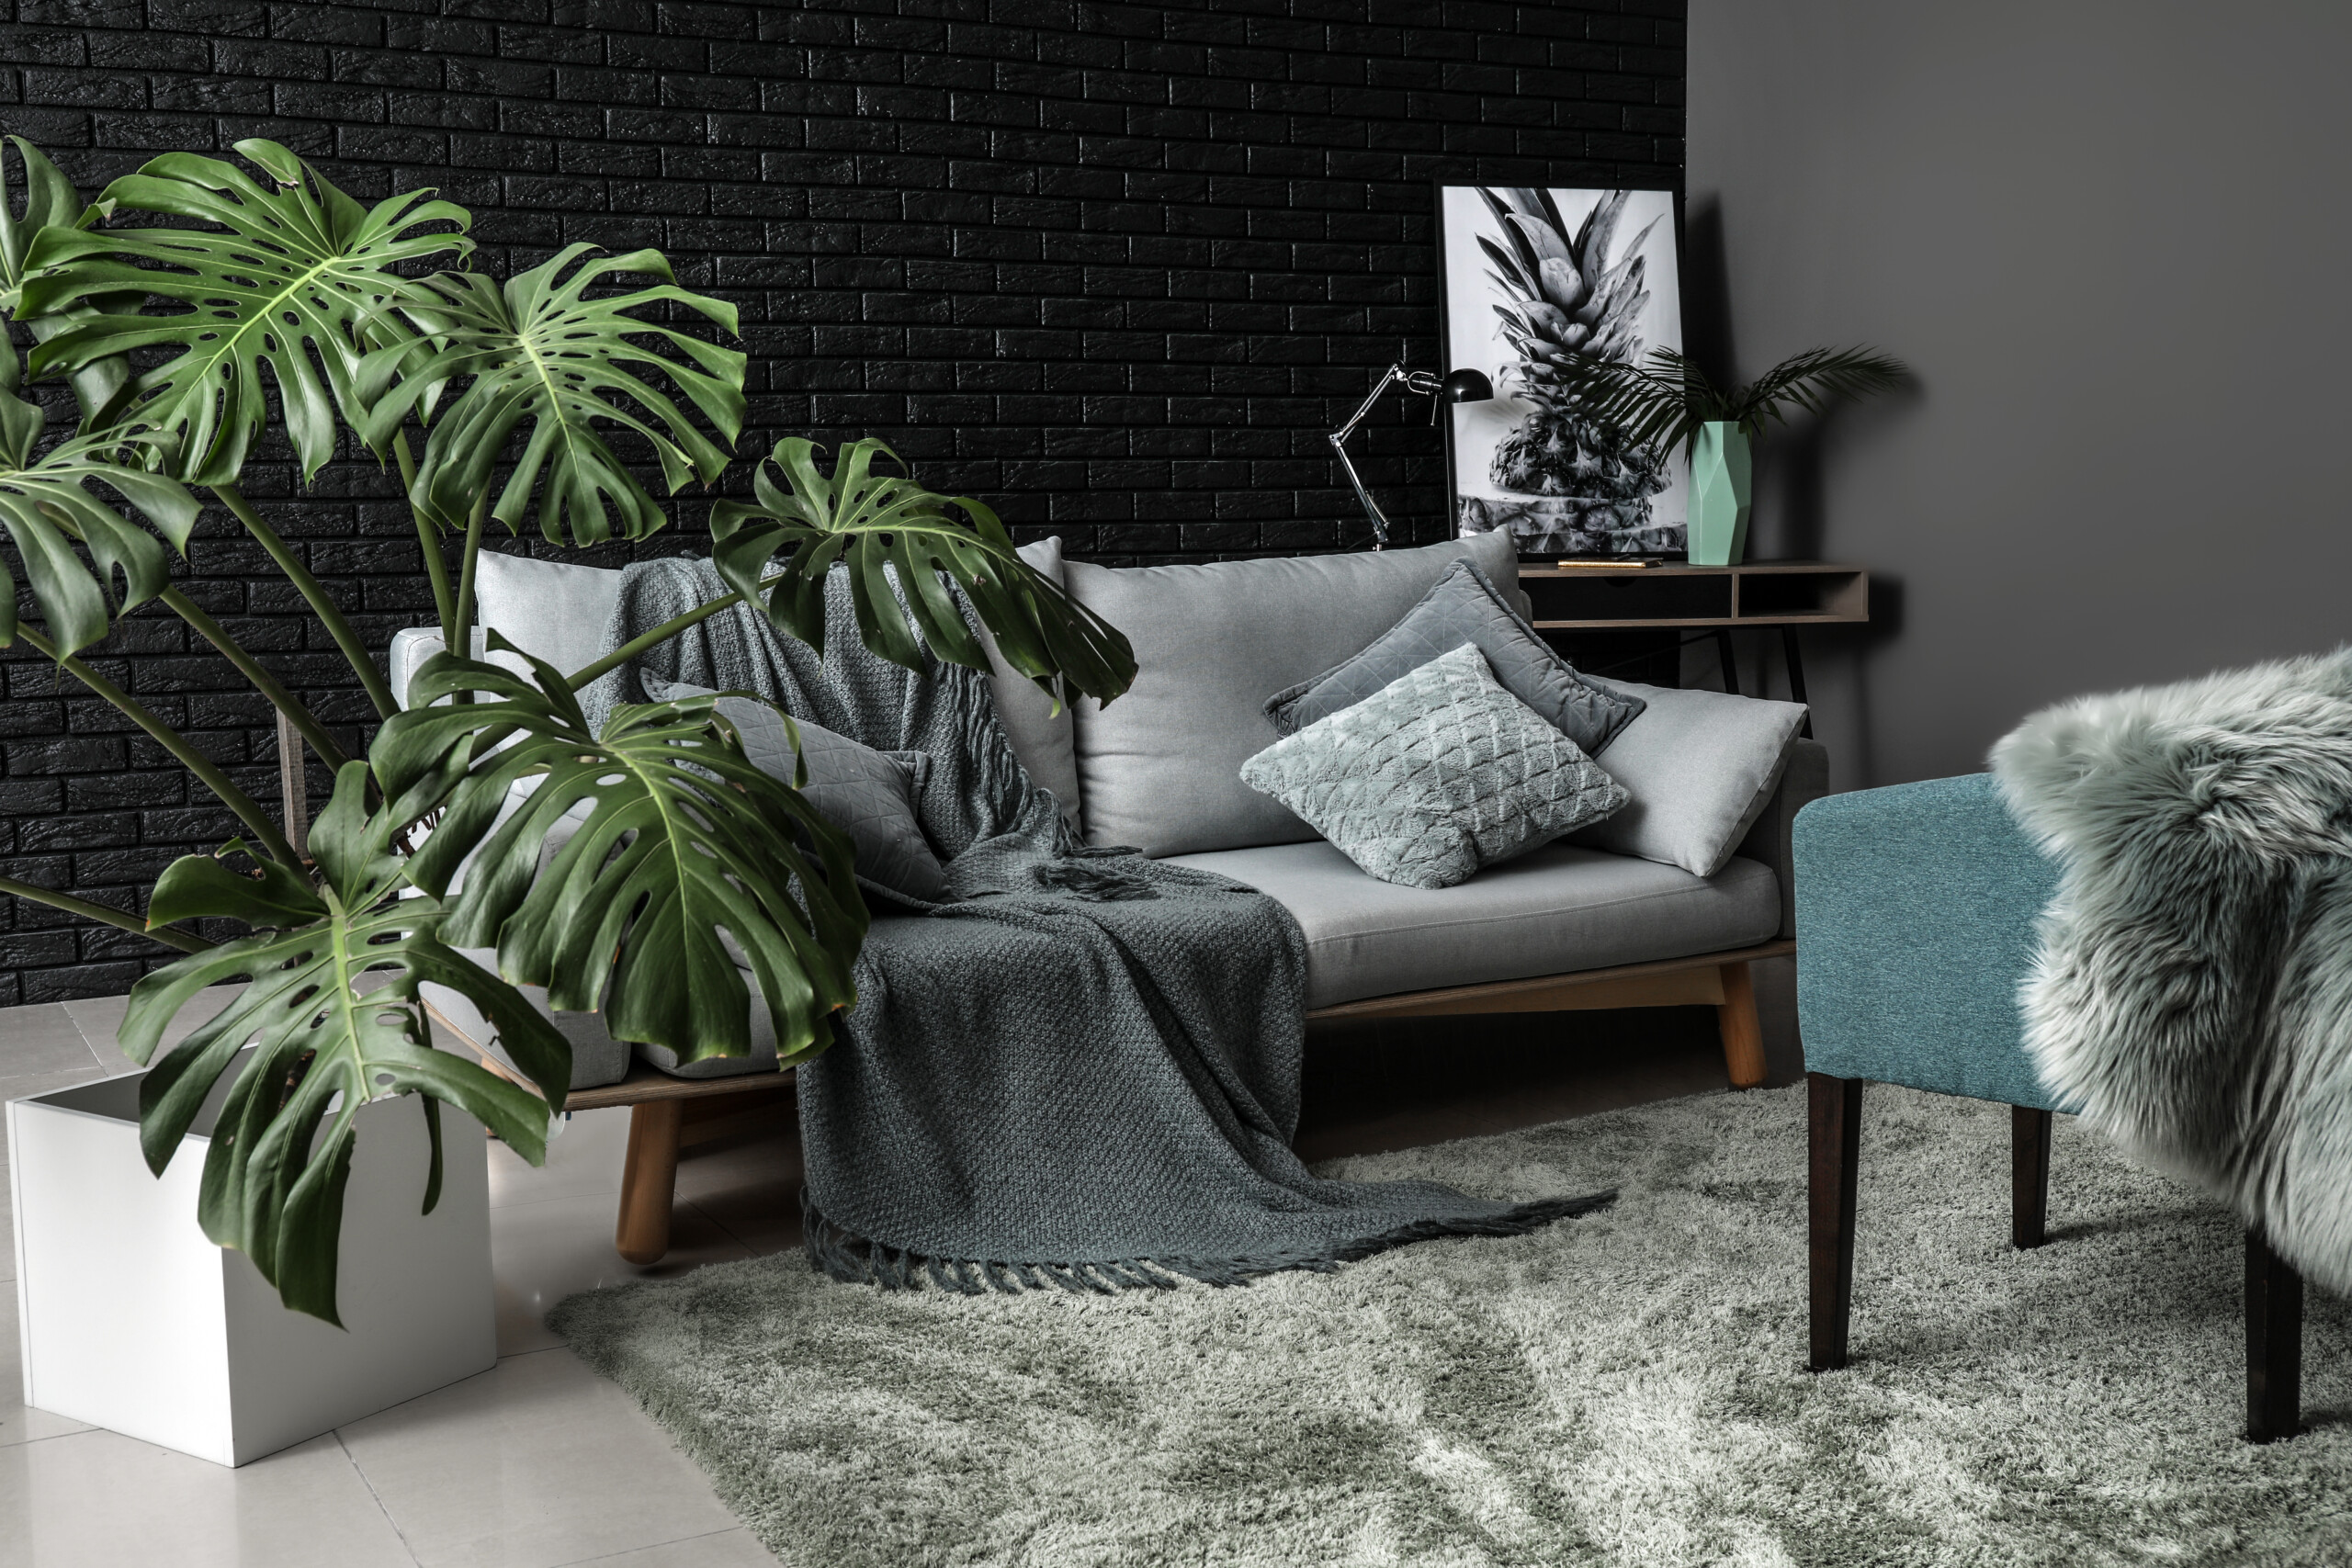 Monochrome Tropical Interior Of The Room Scaled 